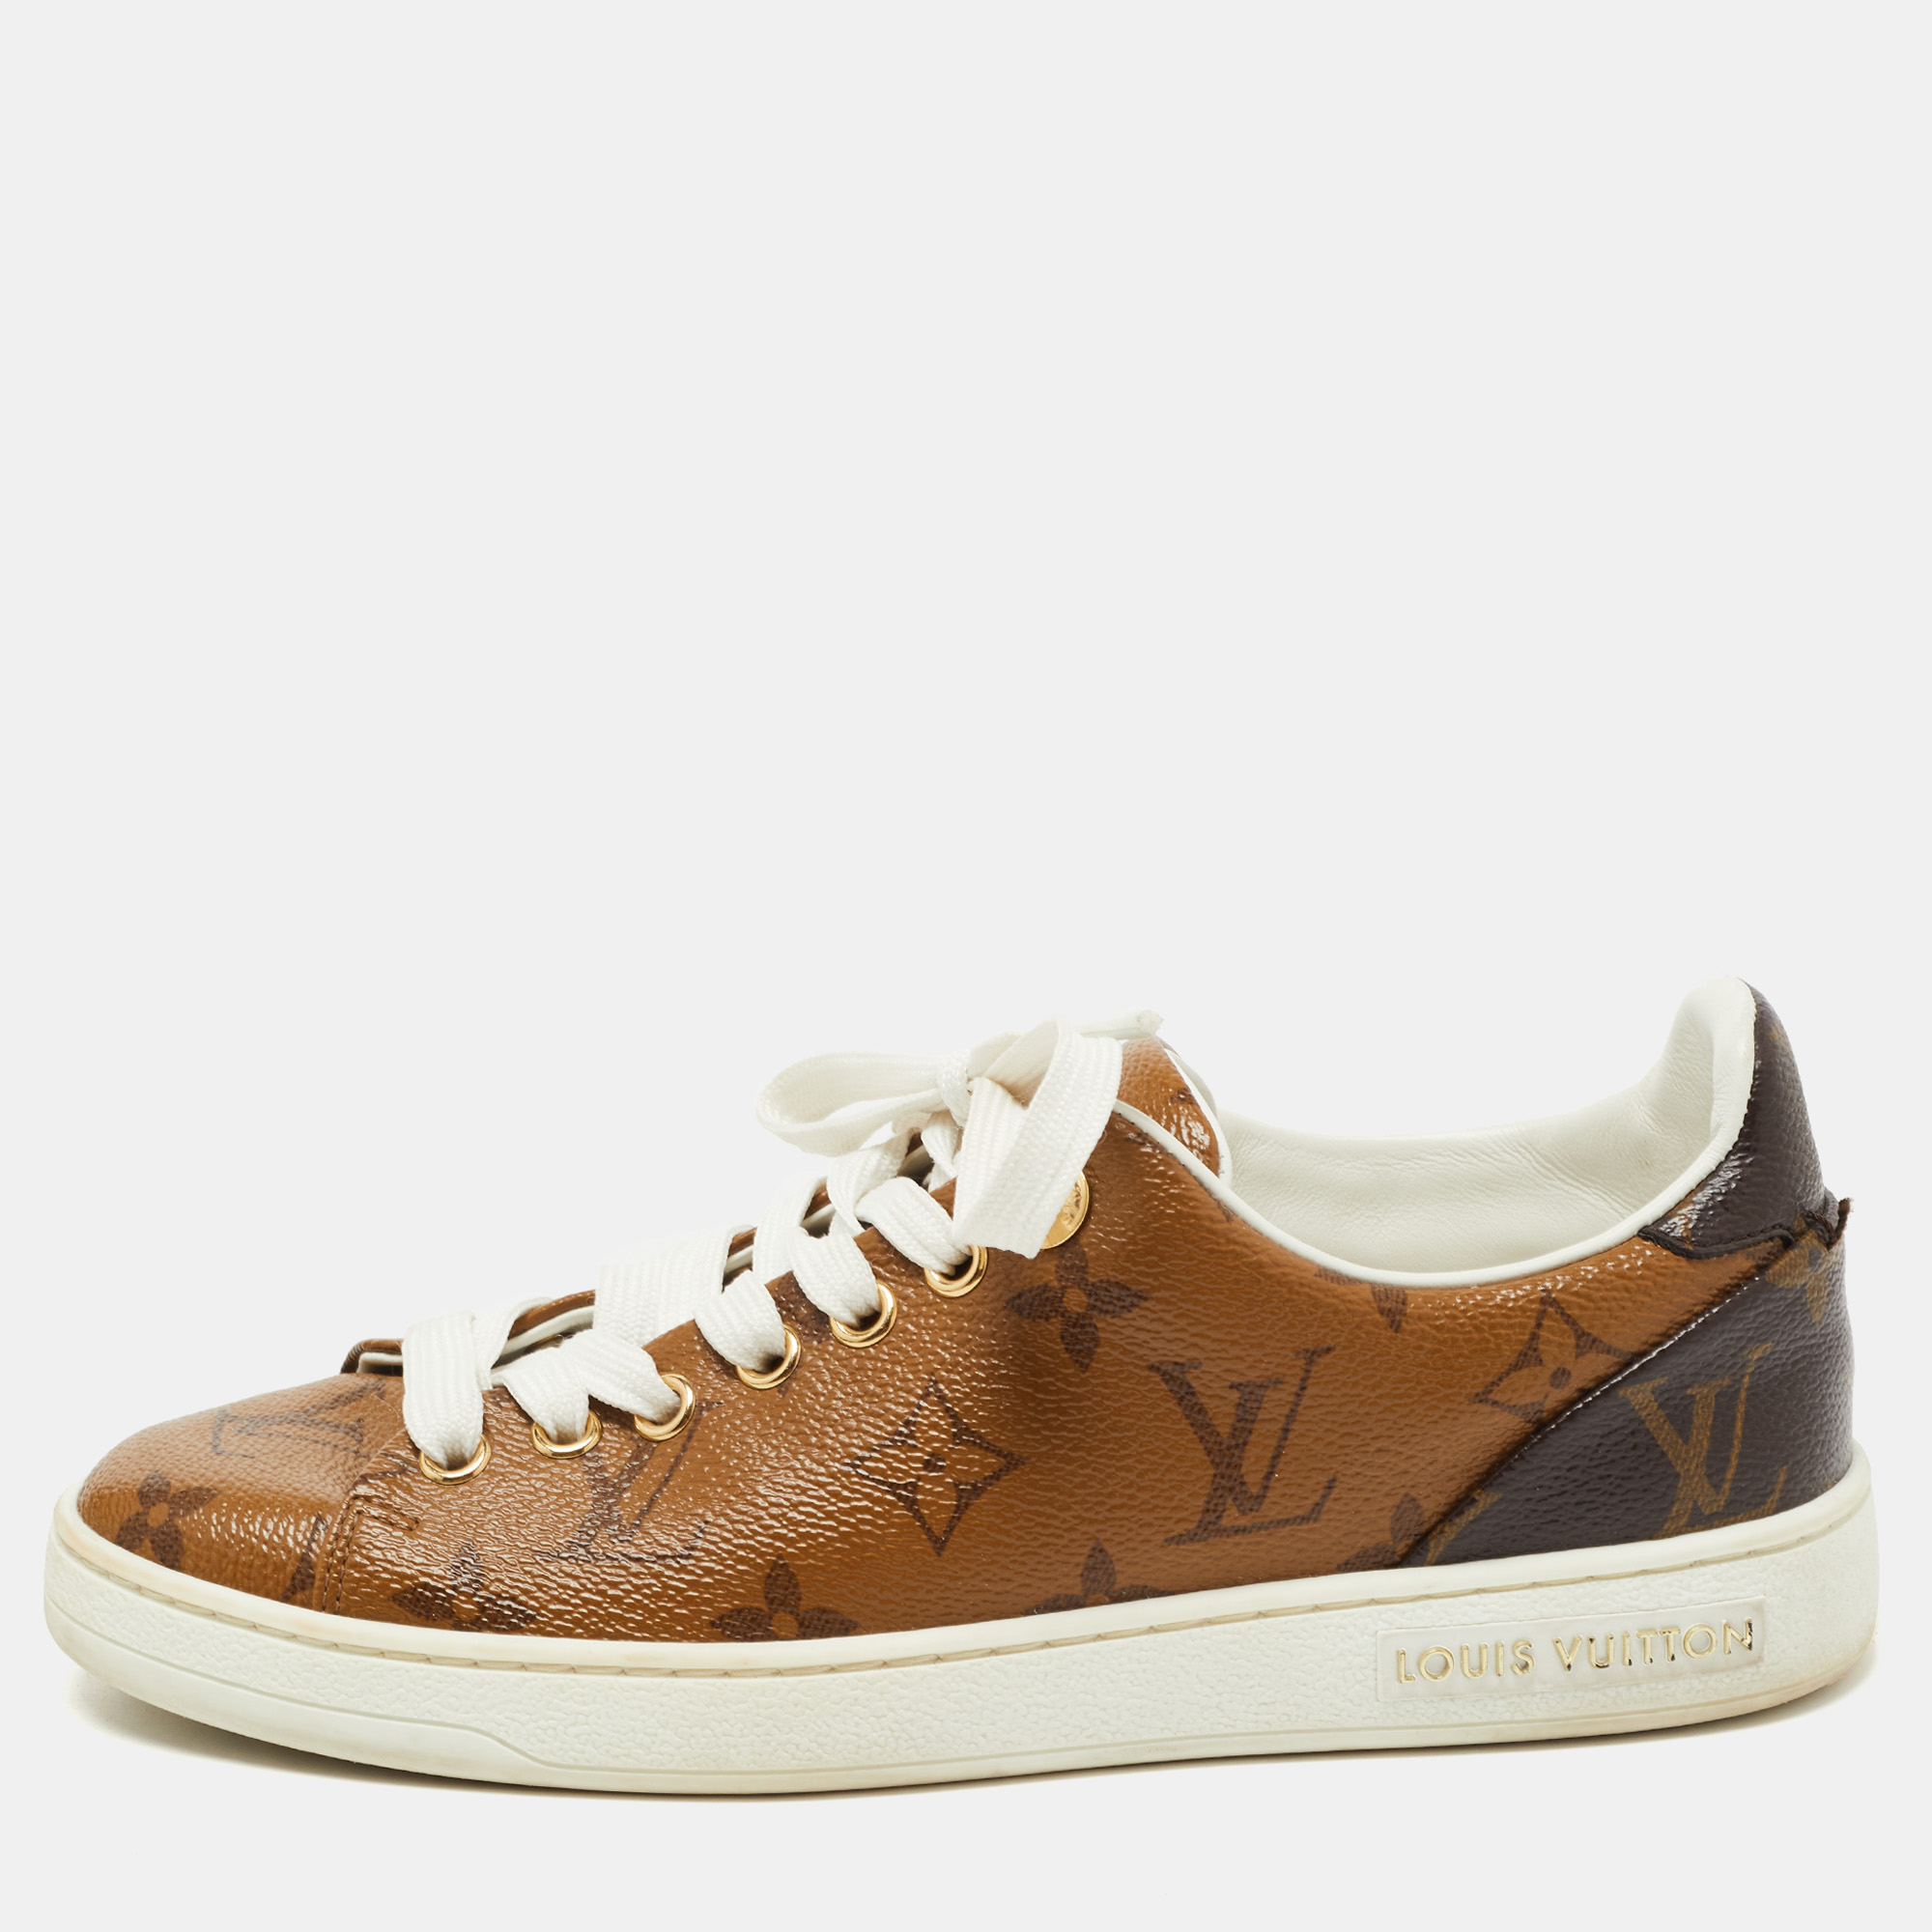 Louis Vuitton Pre-owned Women's Leather Sneakers